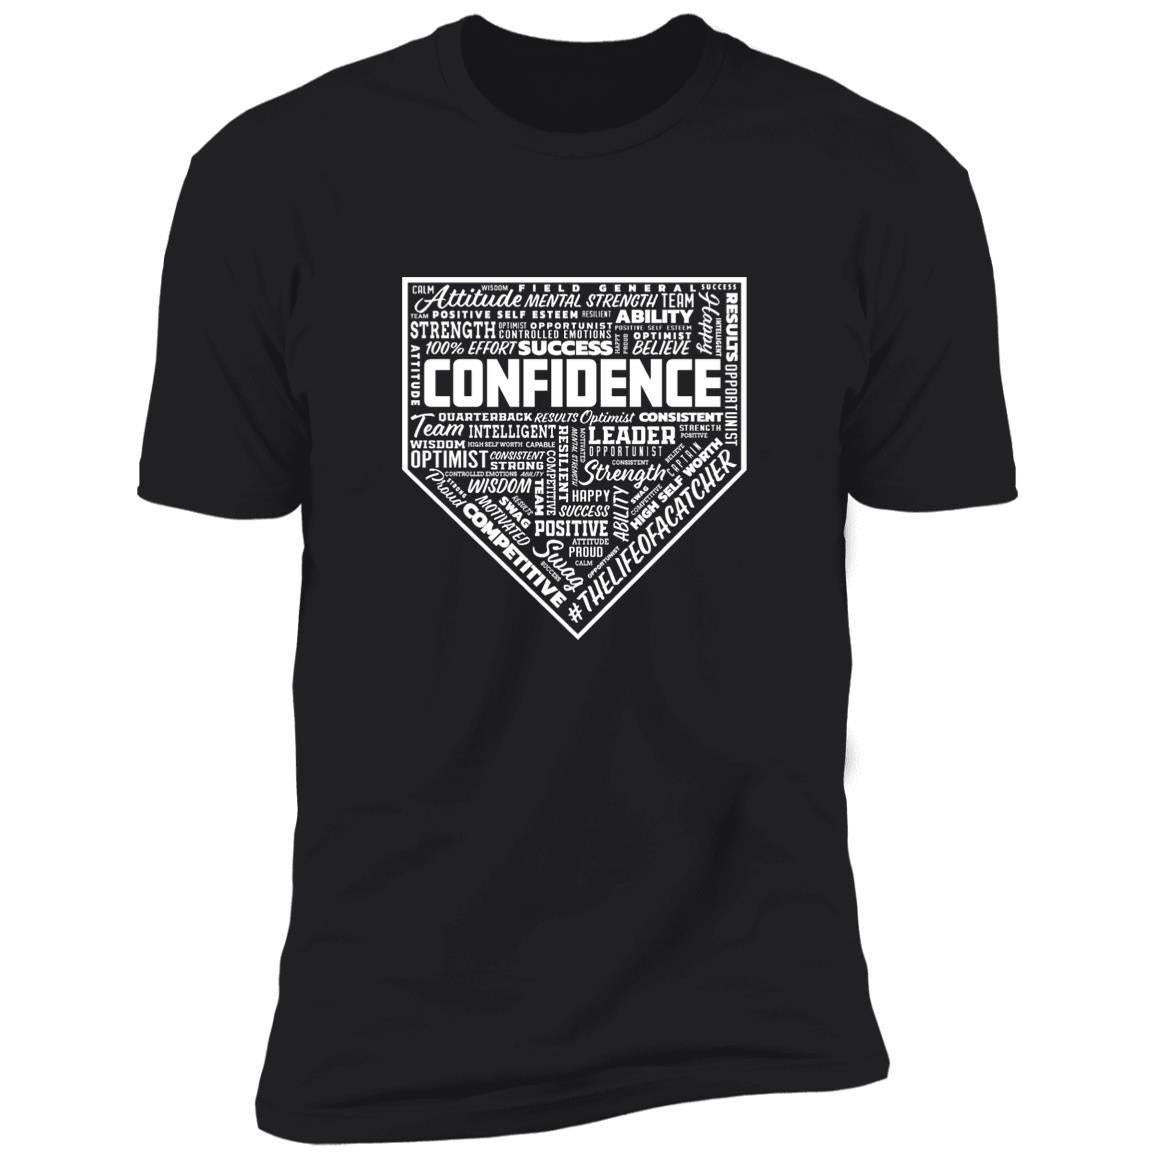 the catching guy confidence t-shirt mockup in black